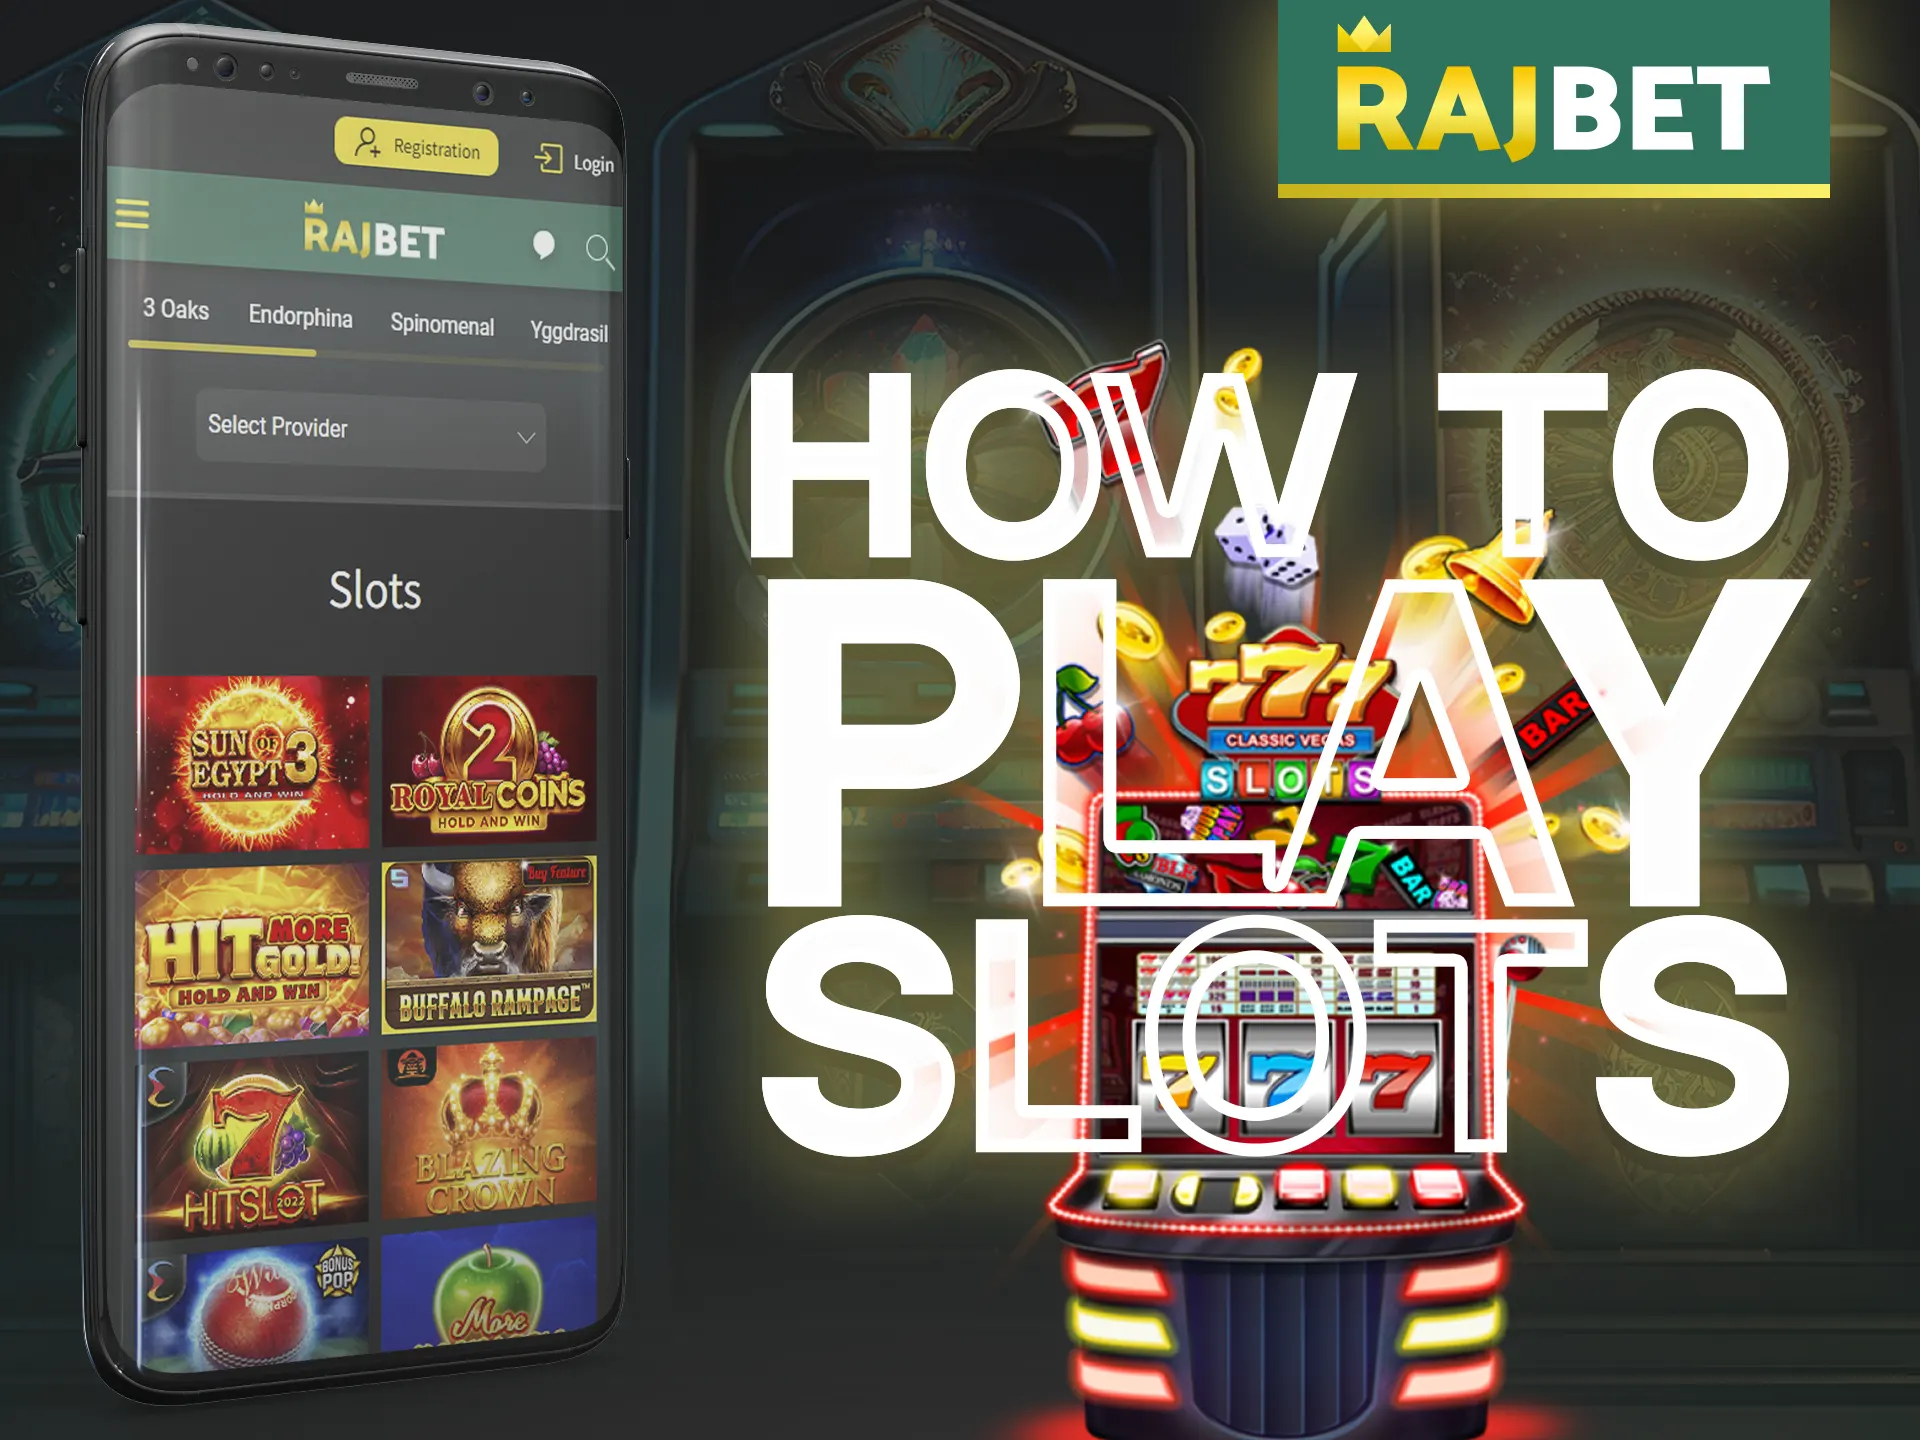 Check out the online slots game guide below.